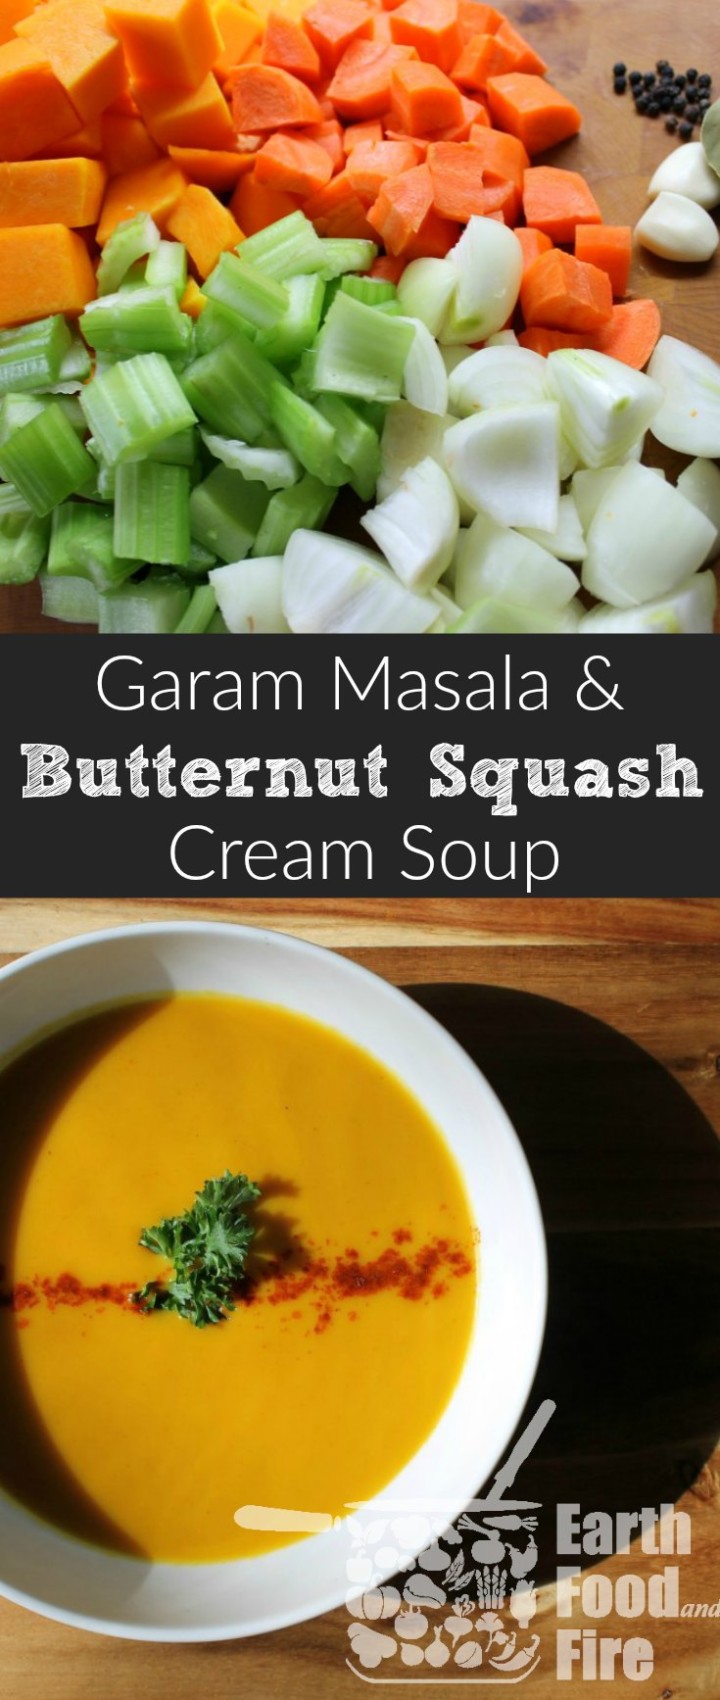 Warm up with this simple, from scratch, butternut squash soup with curry. An ideal freezer meal or recipe for batch cooking!